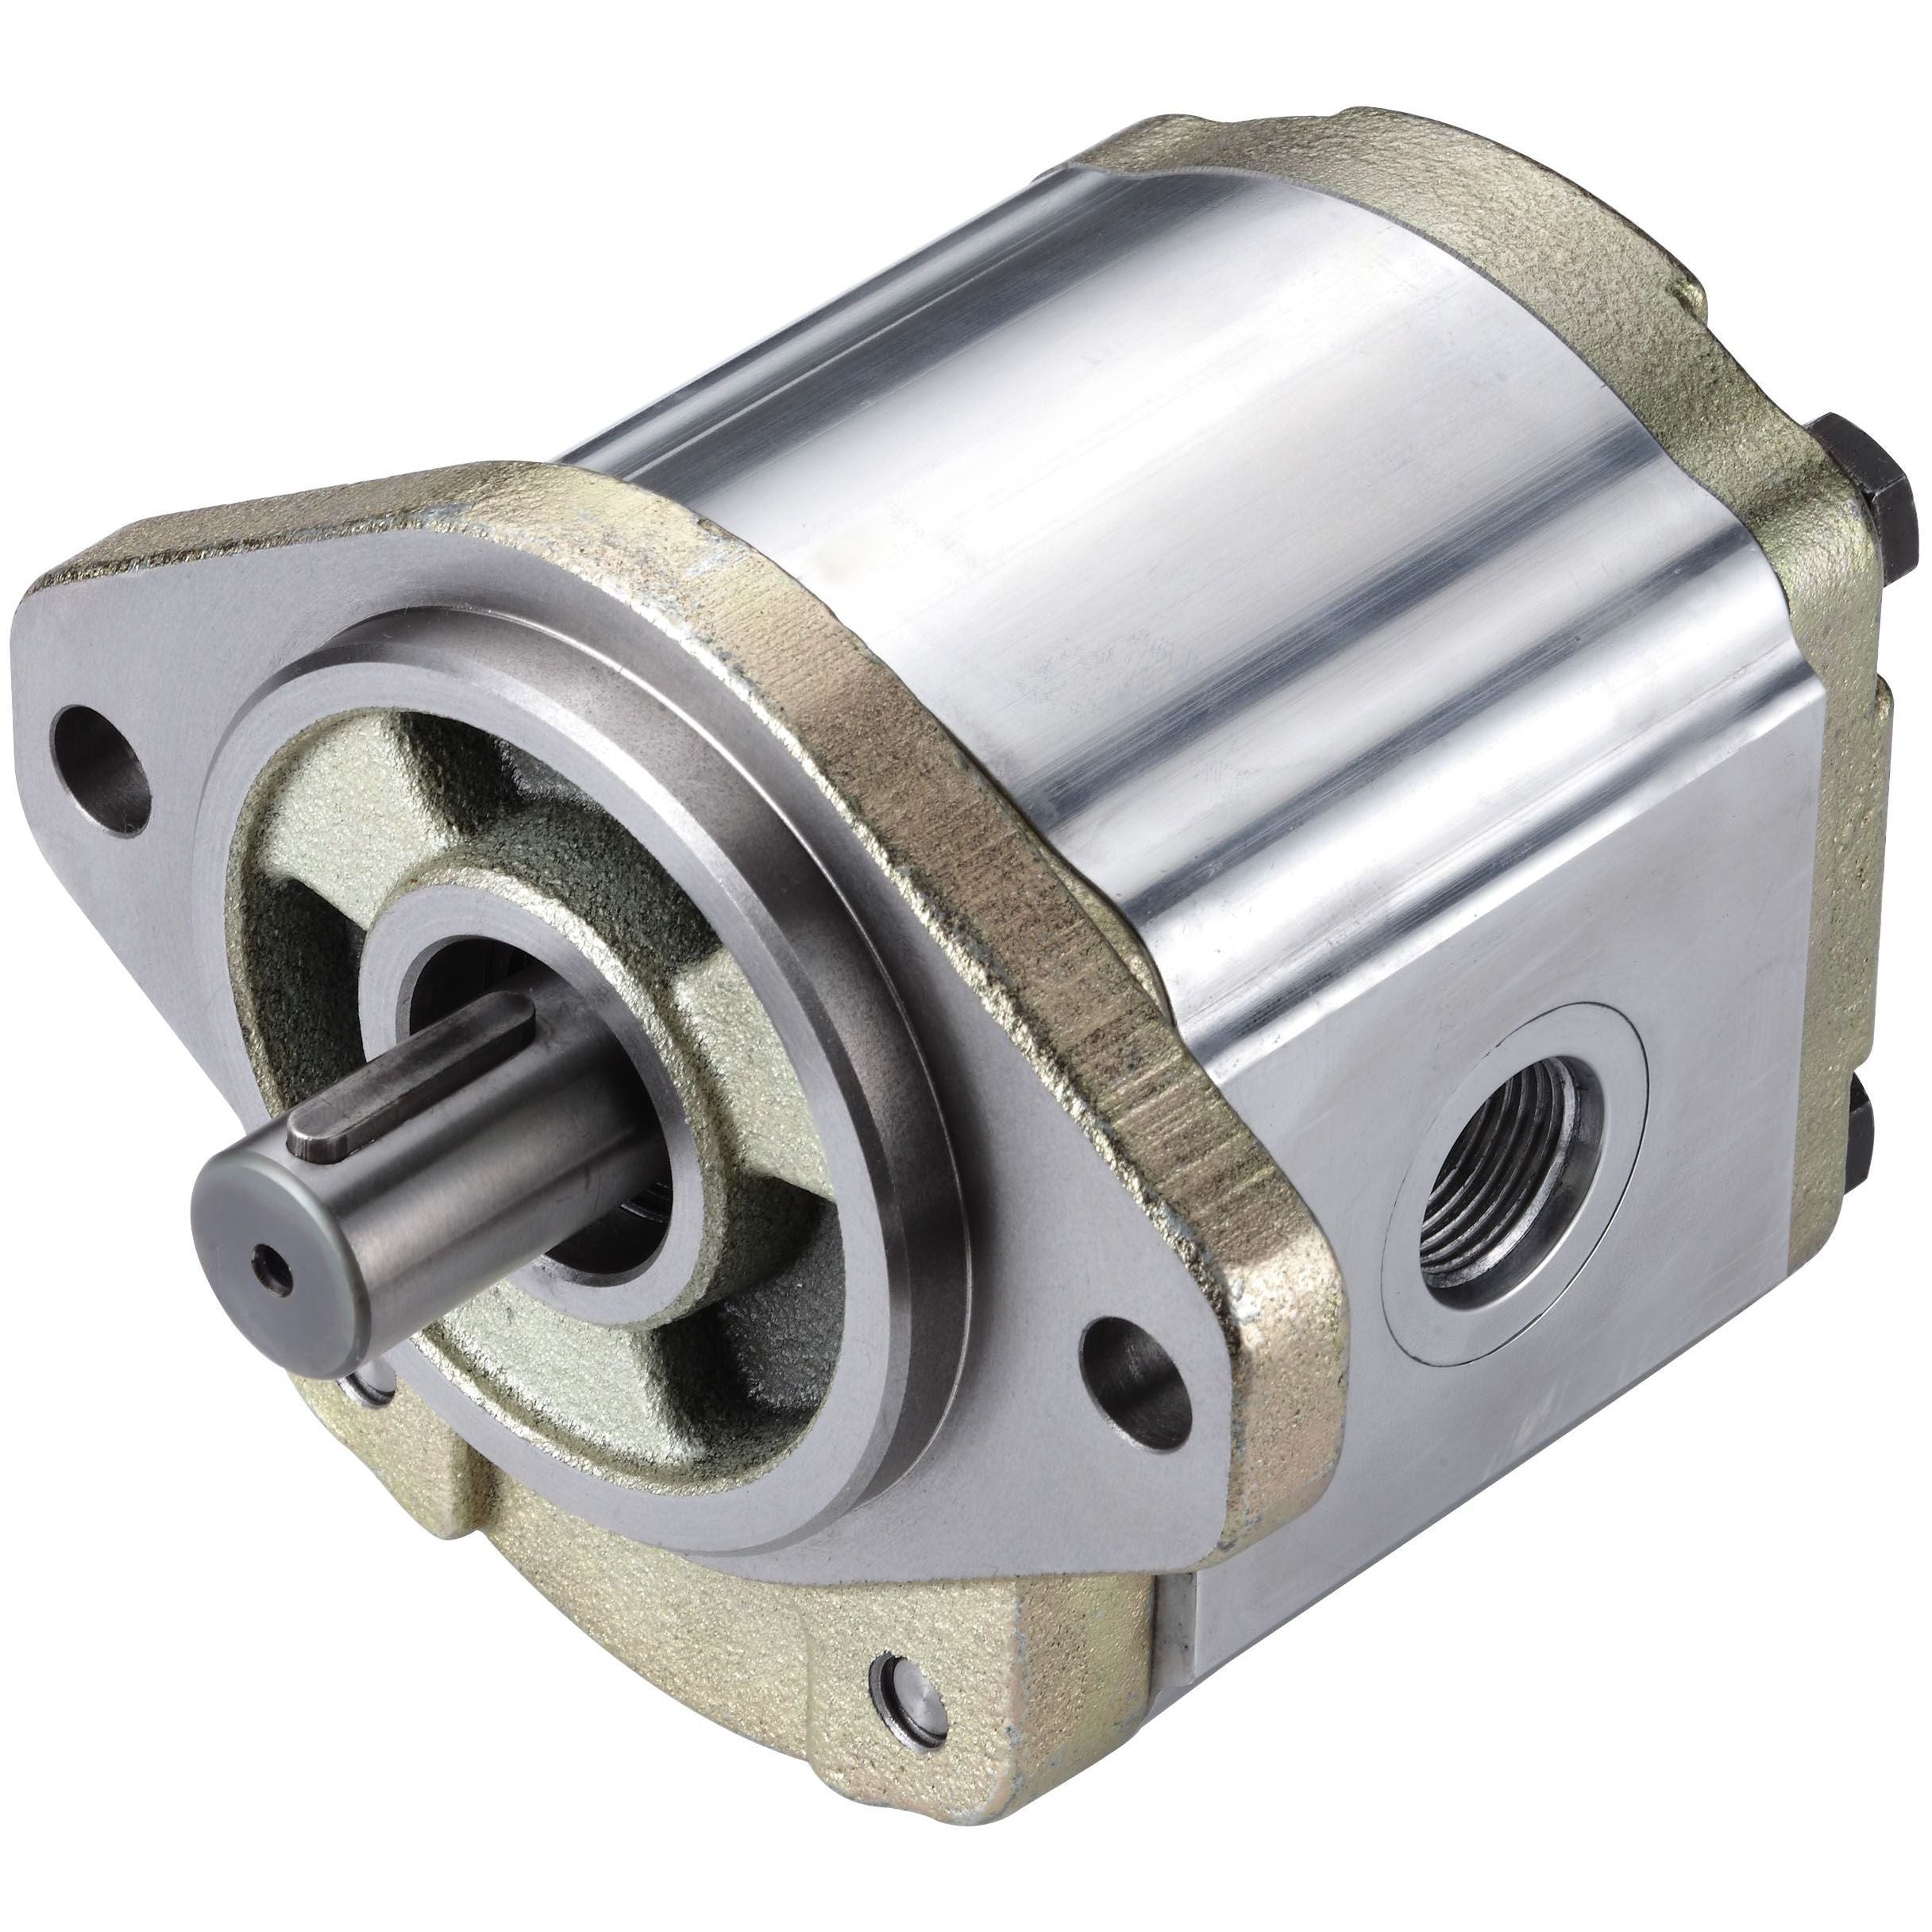 3GB8ZU170R : Honor Gear Pump, CW Rotation, 70cc (4.27in3), 33.29 GPM, 2300psi, 2500 RPM, #16 SAE (1") In, #12 SAE (3/4") Out, Splined Shaft 13-Tooth, 16/32 Pitch, SAE B 2-Bolt Mount